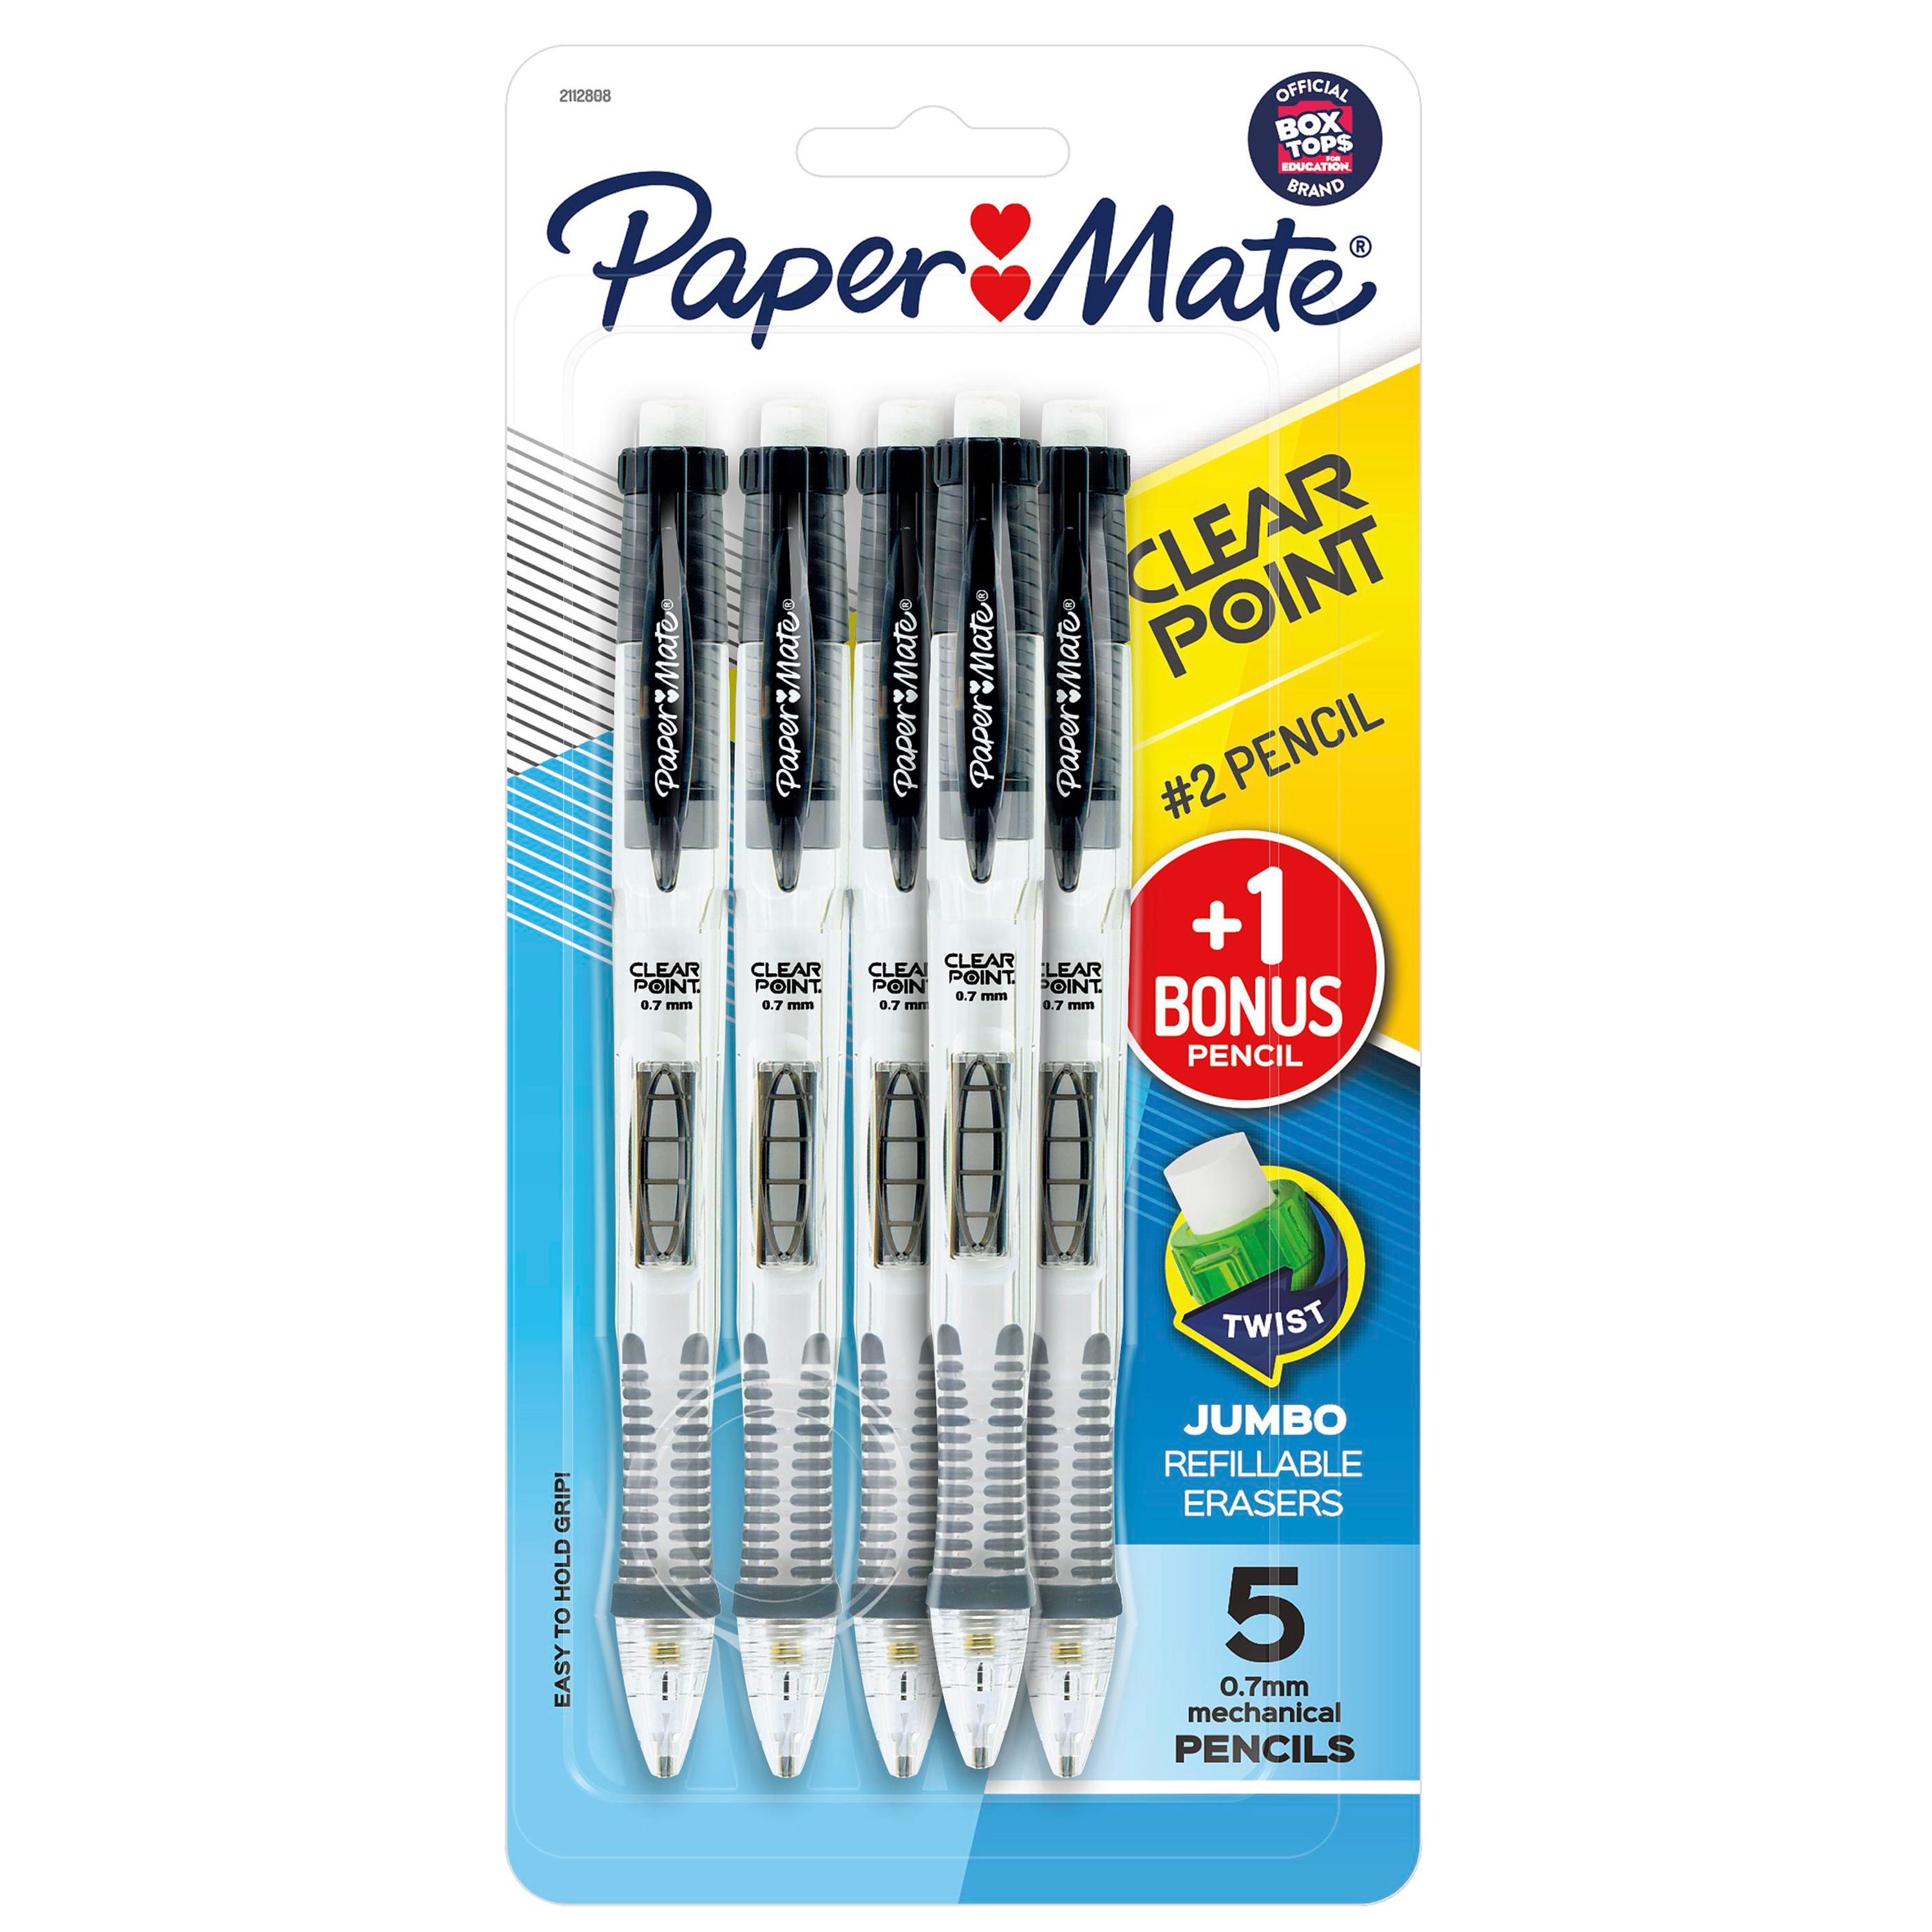 Paper Mate Clearpoint Mechanical Pencils, 5 Count